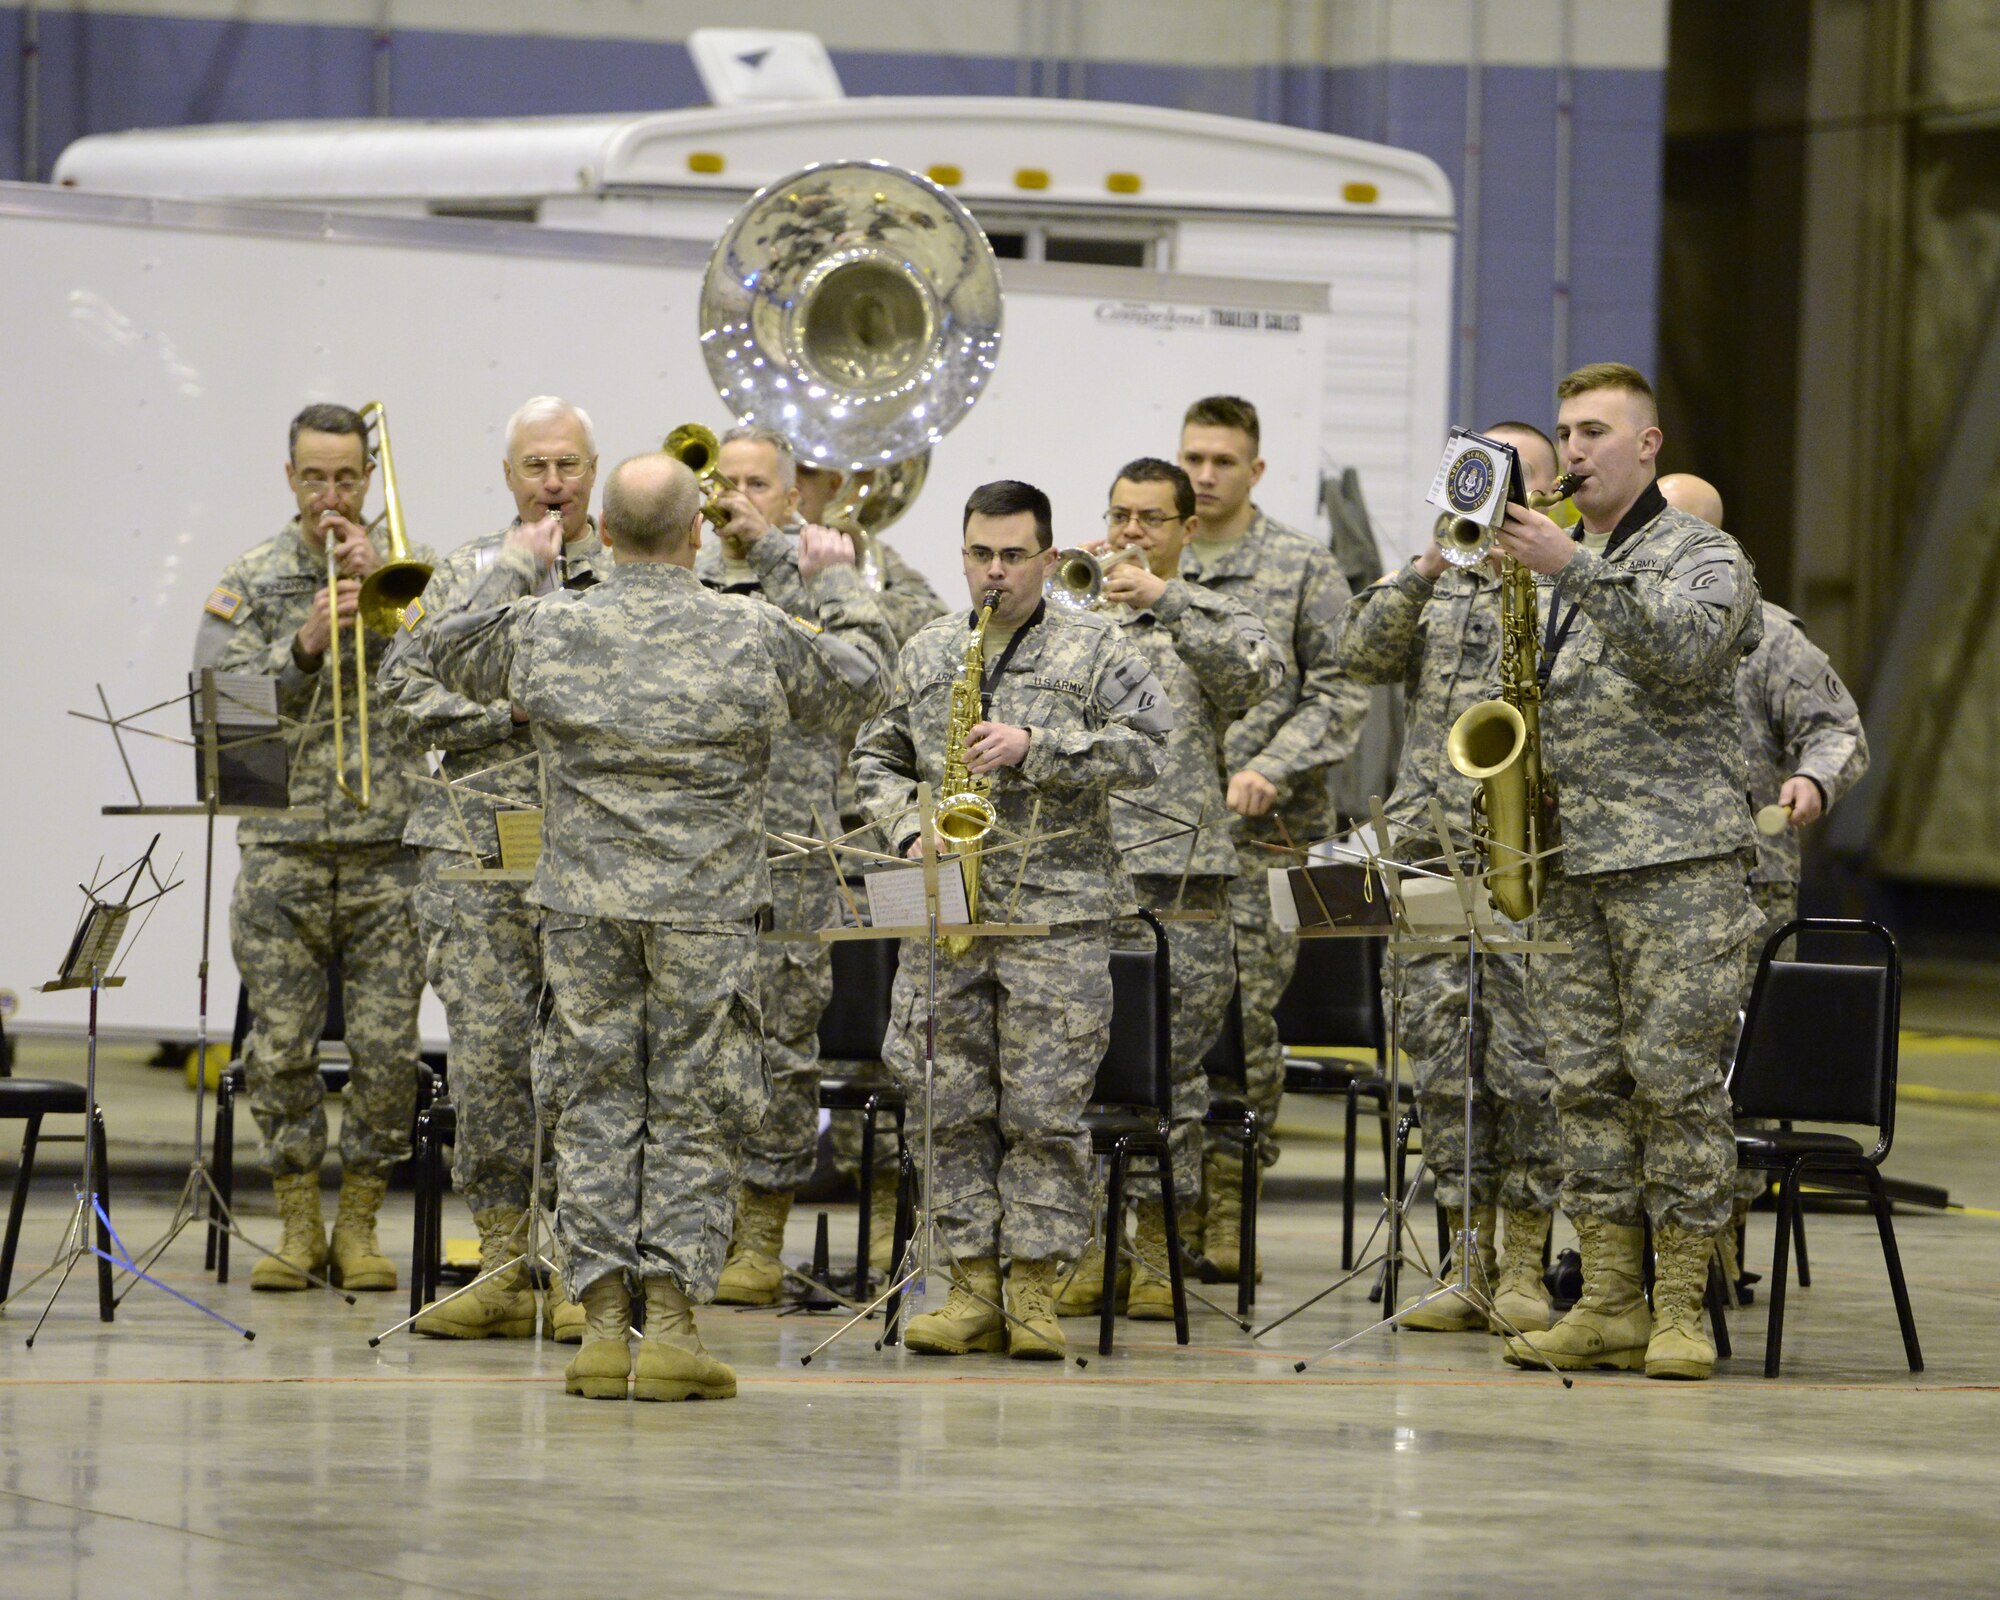 U.S. Army Soldiers with the 42nd Infantry Division Band, New York National Guard, supporting a pre-deployment ceremony for the 1569th Transportation Company, New York Army National Guard conducted in a hangar at the 105th Airlift Wing, March 9, 2014.  (U.S. Air National Guard photo by Tech. Sgt. Michael OHalloran/Released)